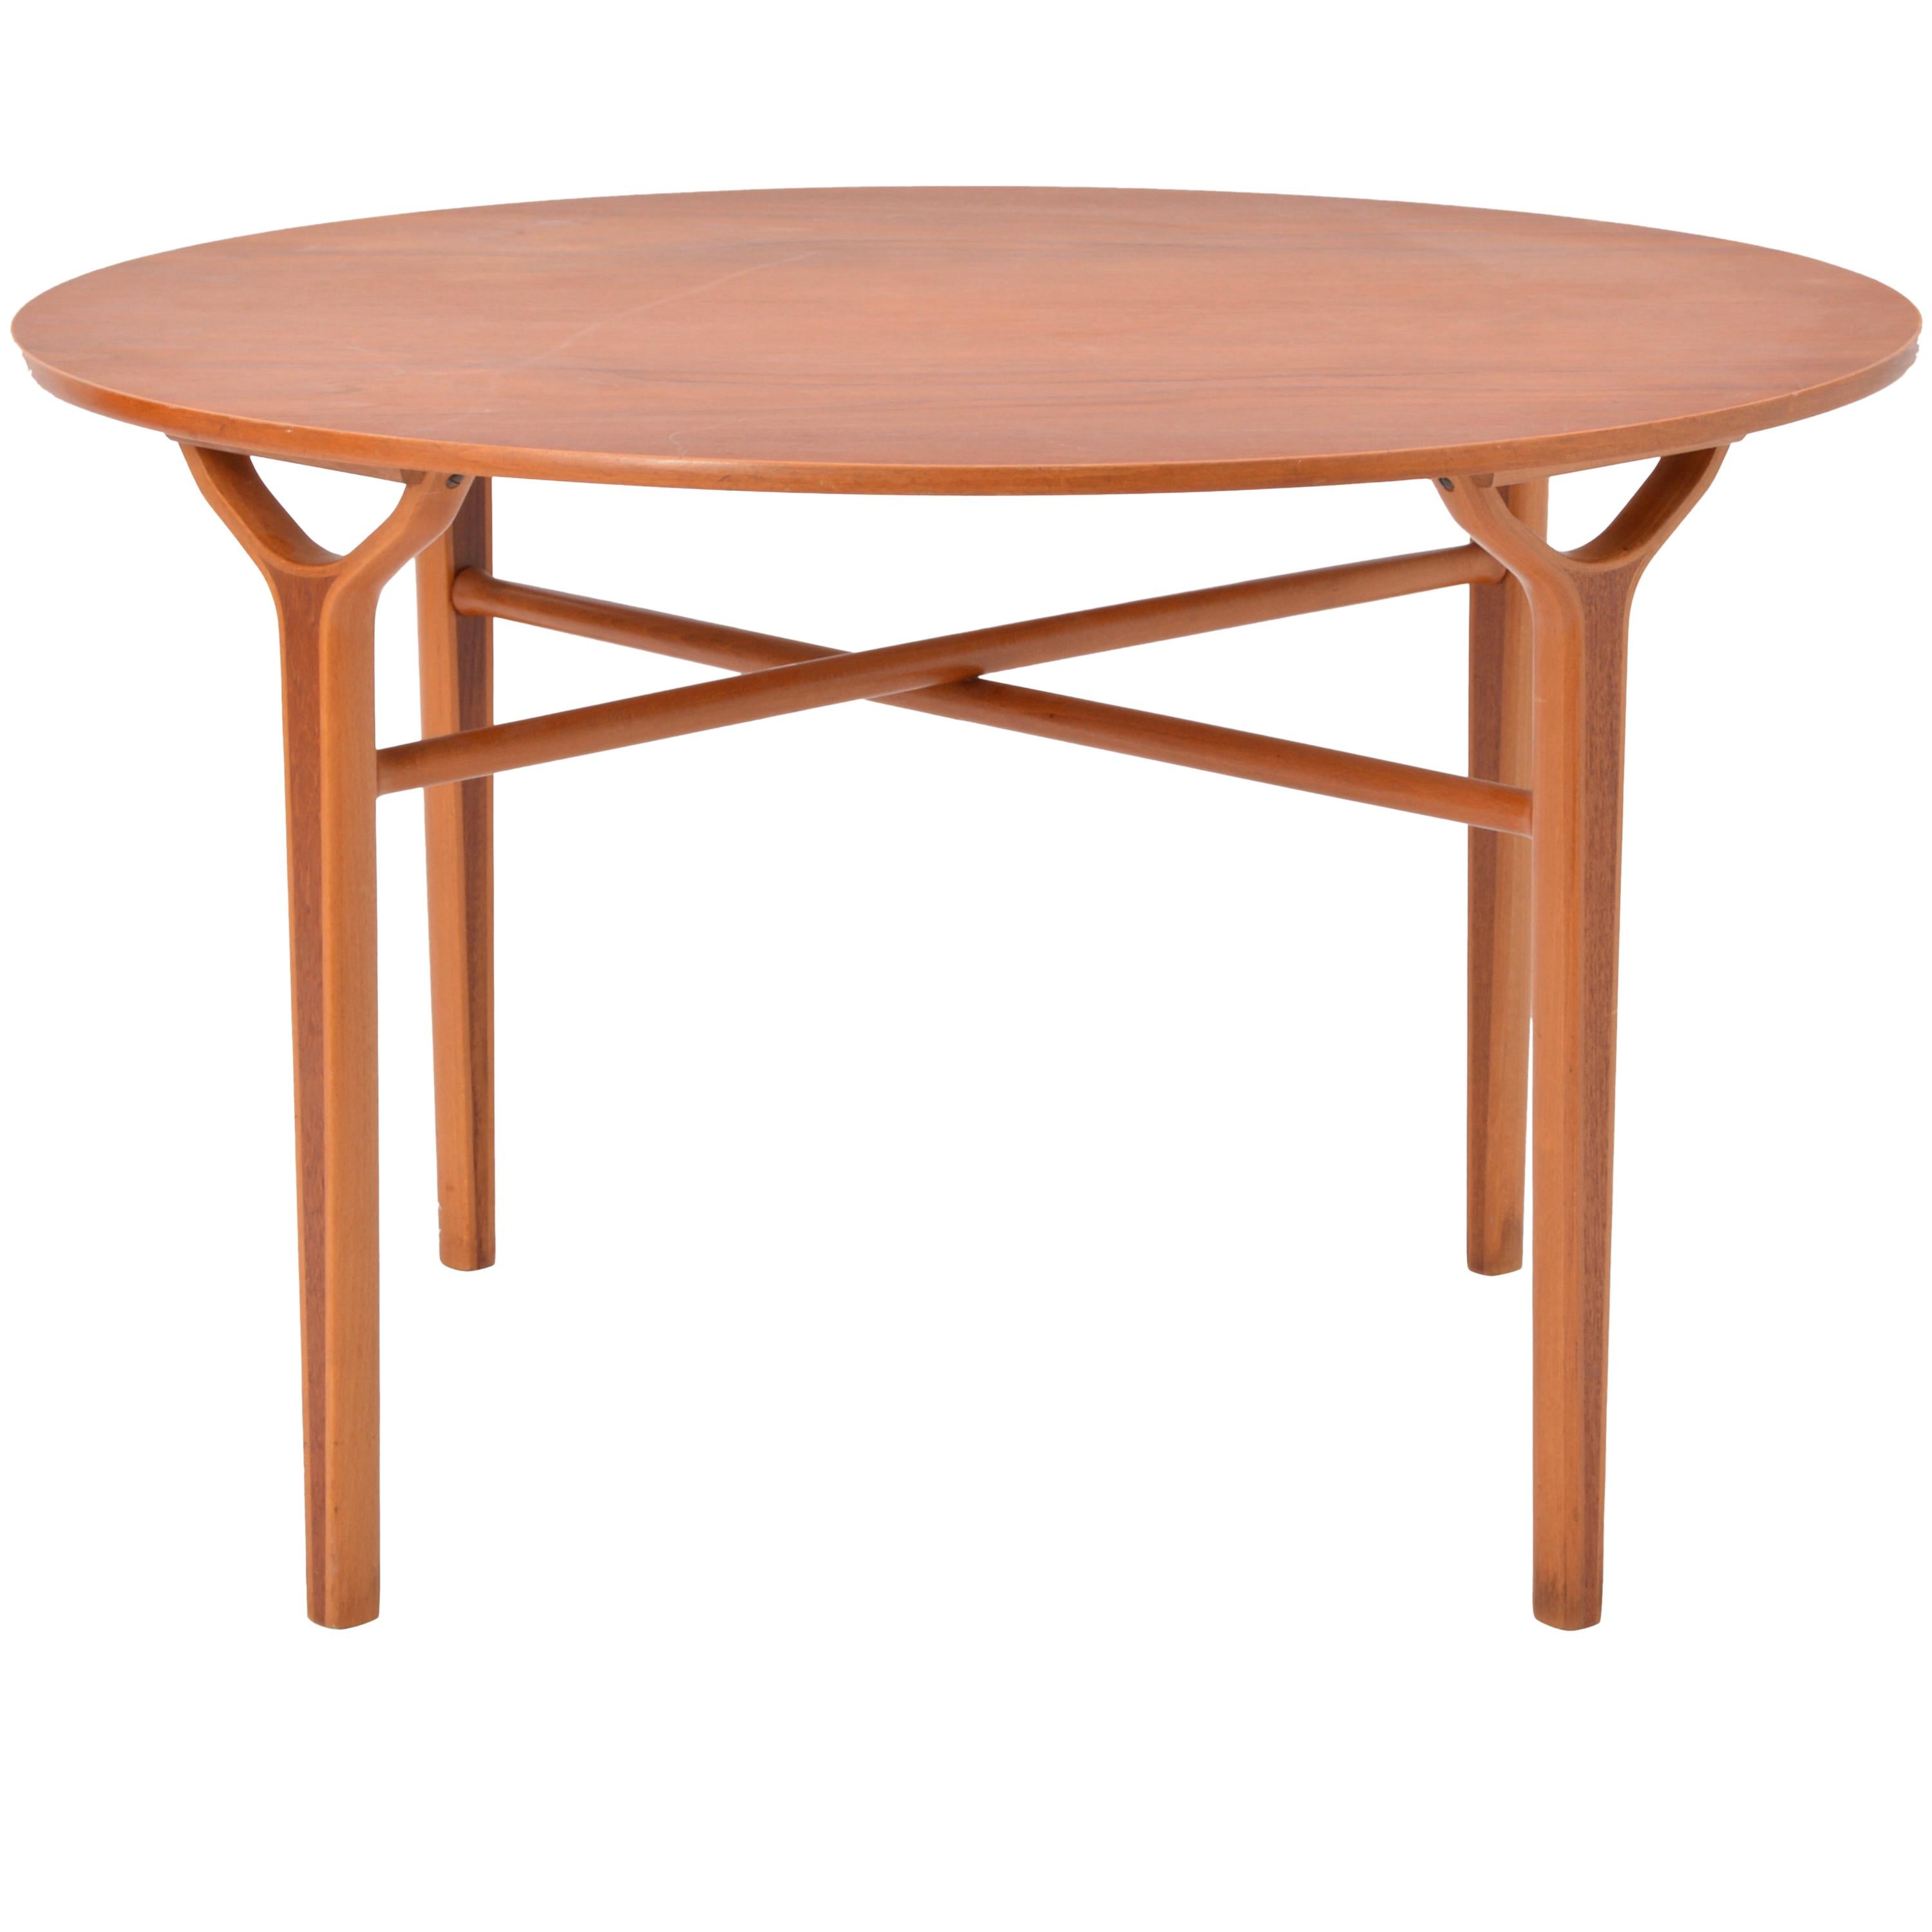 Danish Mid-Century Modern Ax table by Peter Hvidt and Orla Mølgaard-Nielsen For Sale